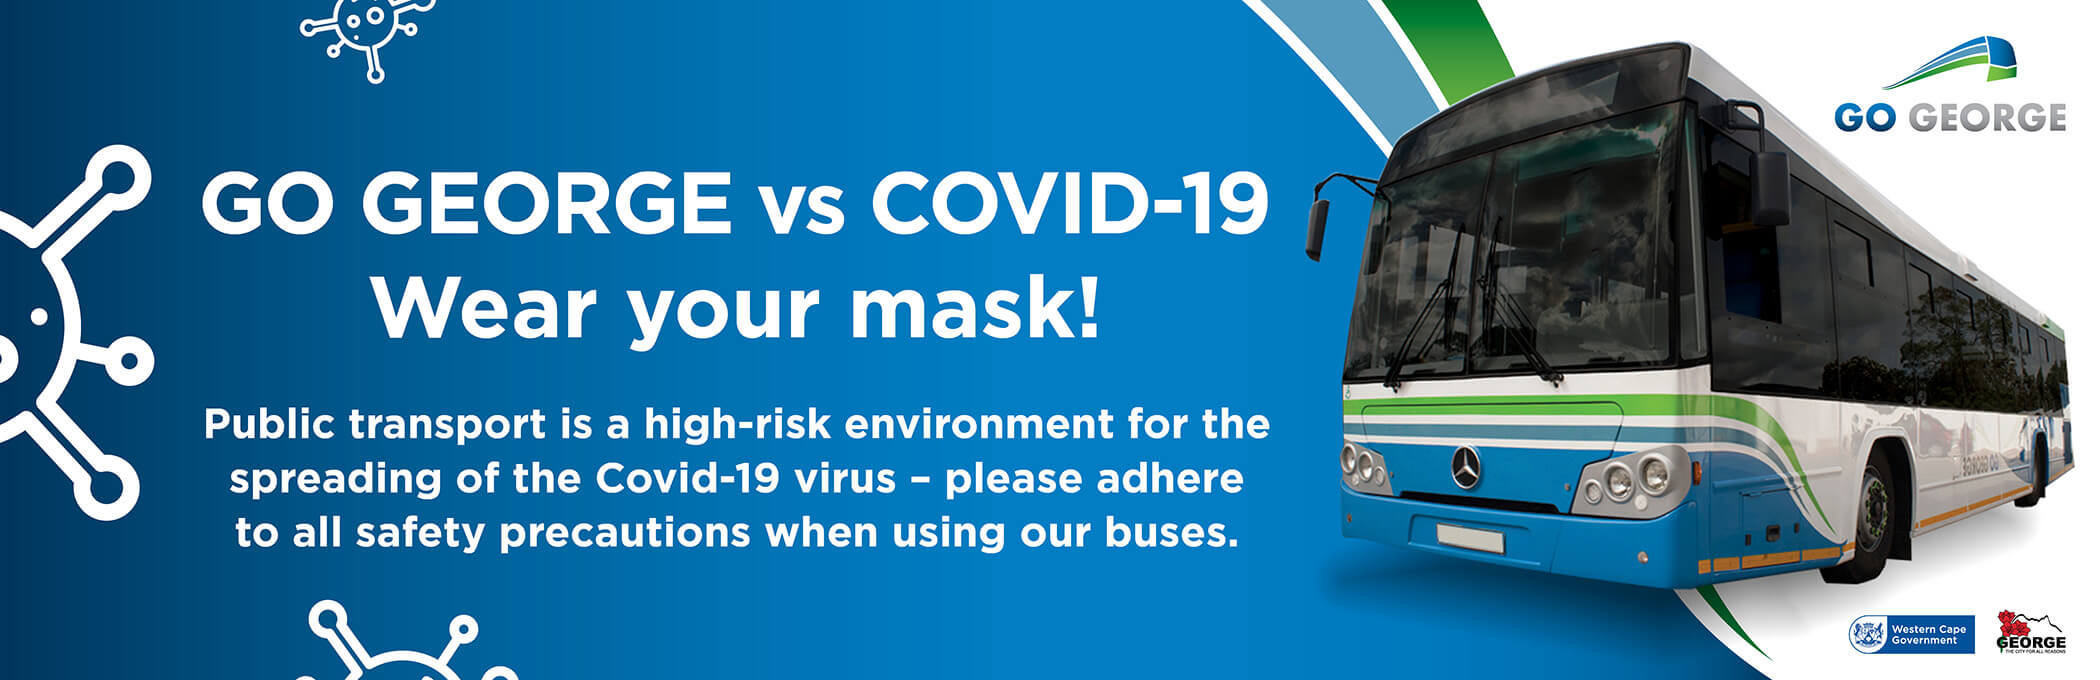 Reminder to wear your mask as Covid-19 safety precaution